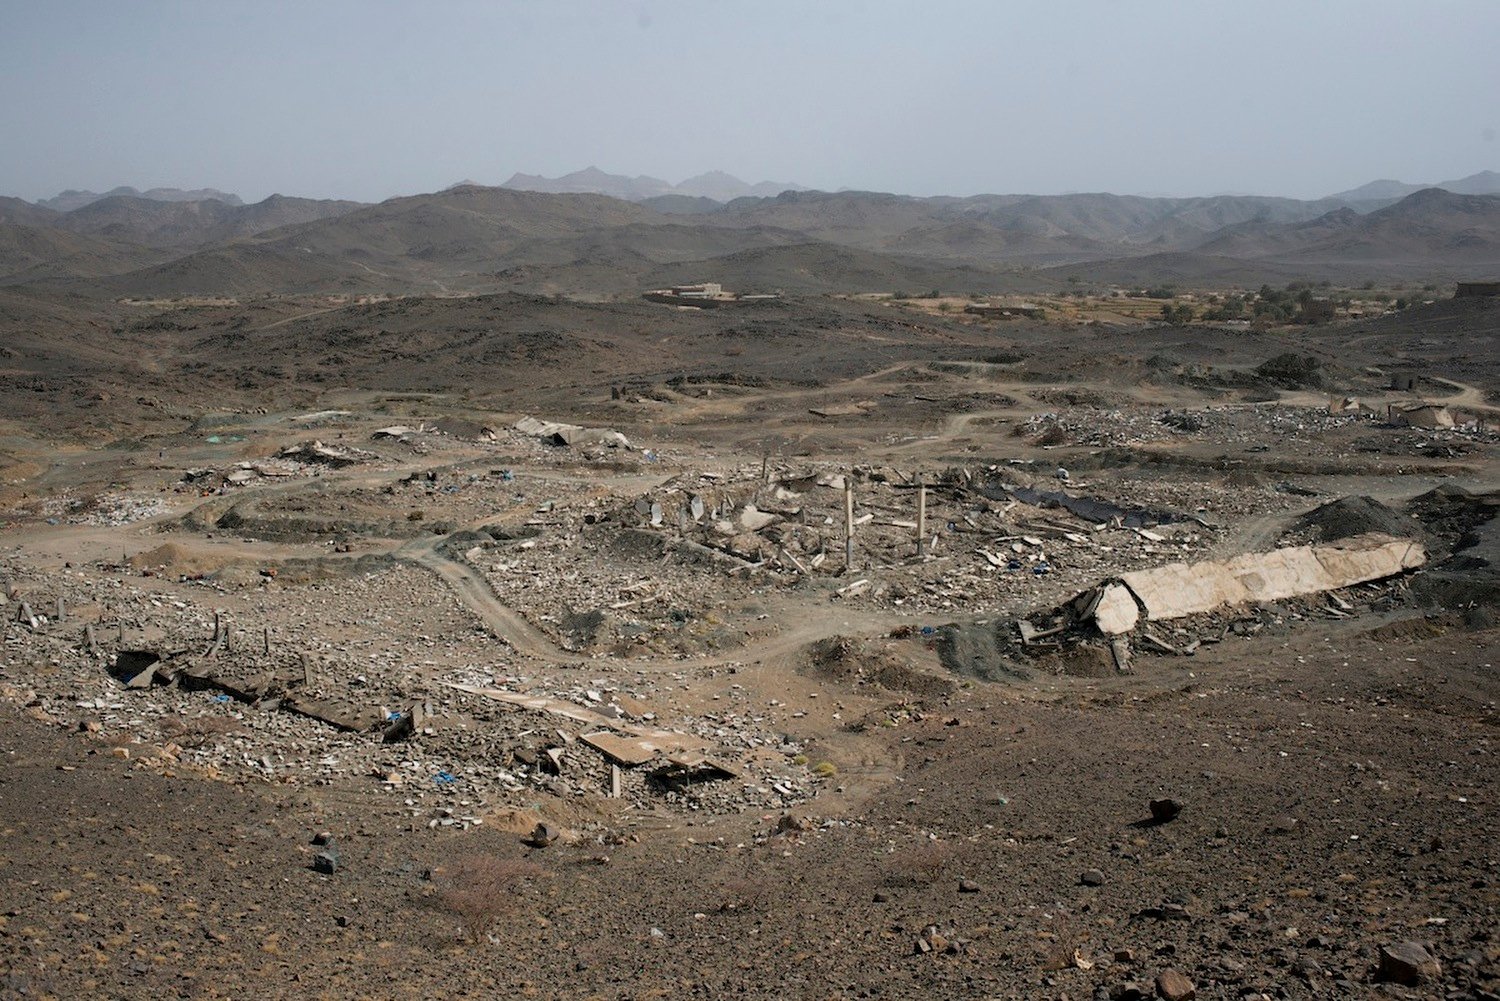 The remains of the Salafi-Sunni religious school lays destroyed on the plains of Kitaf. The school was suspected of training Salafi militants, who would go on to join Al Qaeda. 